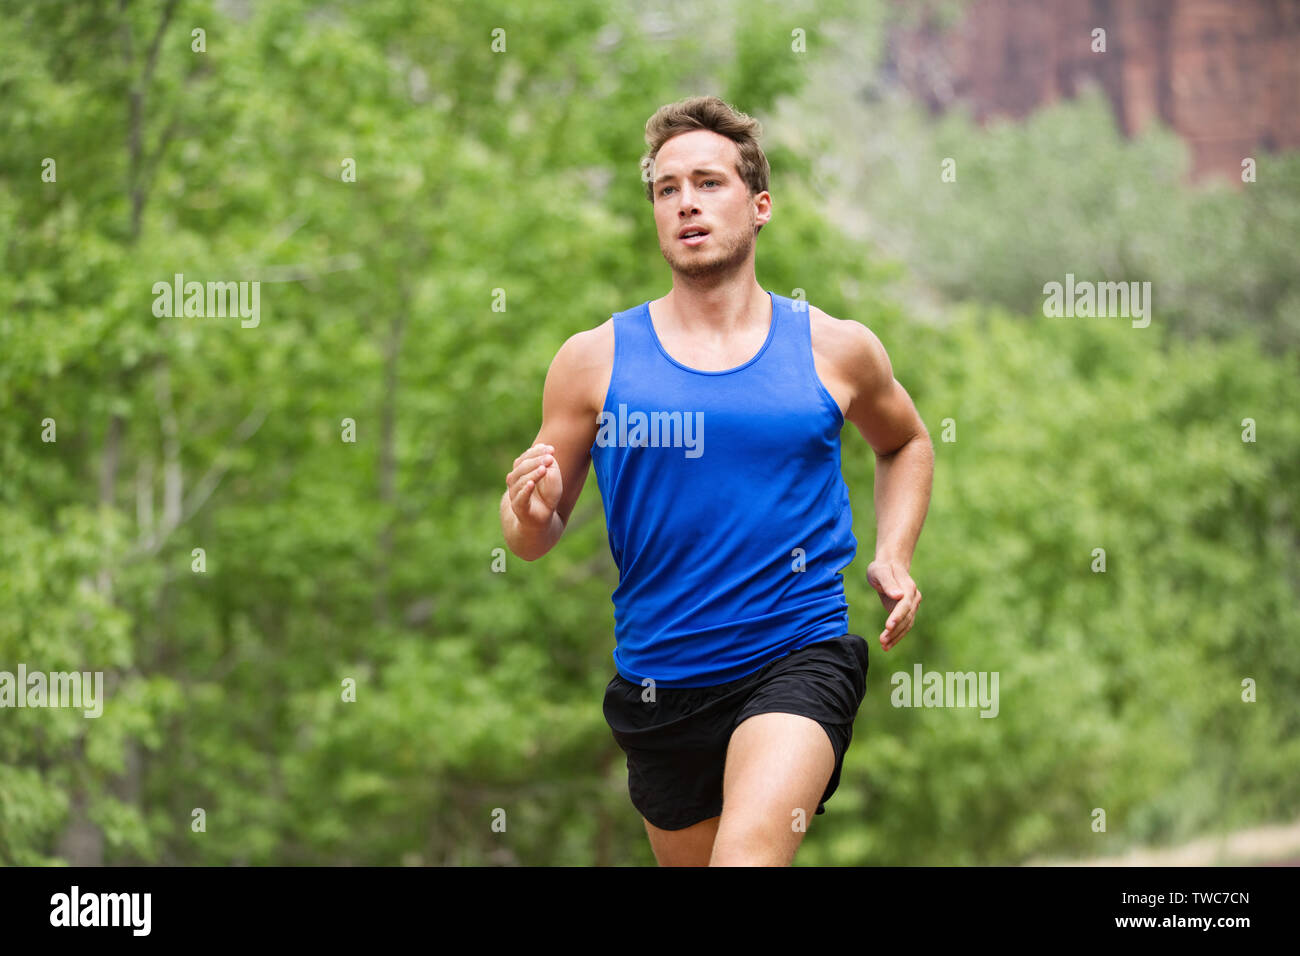 Sport running fitness man training towards goals. Fit male runner sprinting and jogging training outside in forest for marathon run. Muscular handsome Caucasian model in his 20s. Stock Photo